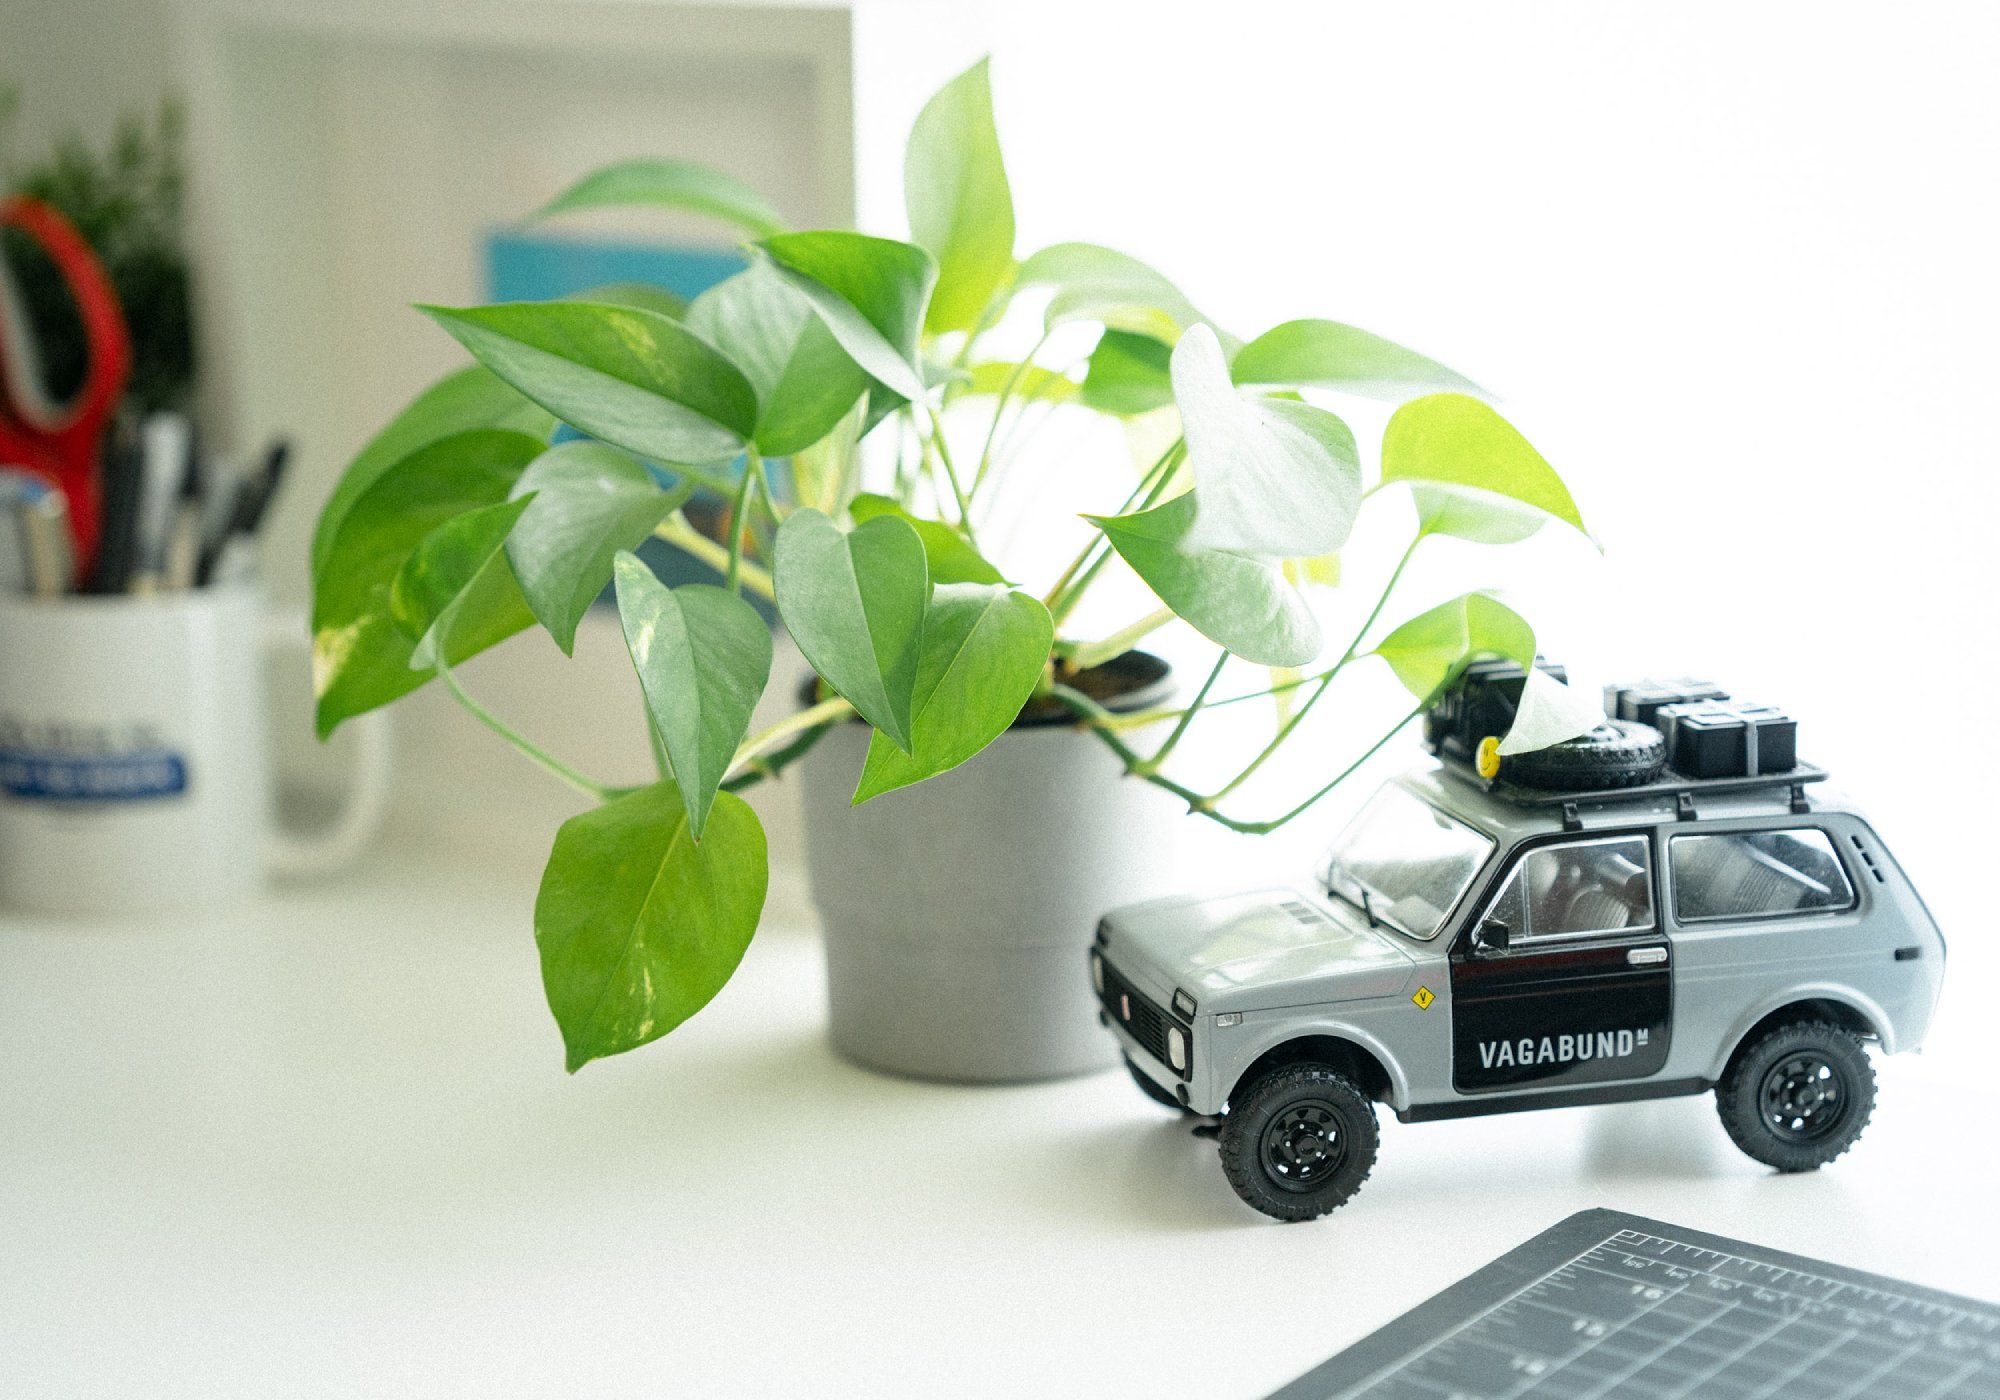 A scale model of a 4×4 Lada Niva made by Vagabund Moto and a potter indoor ivy plant